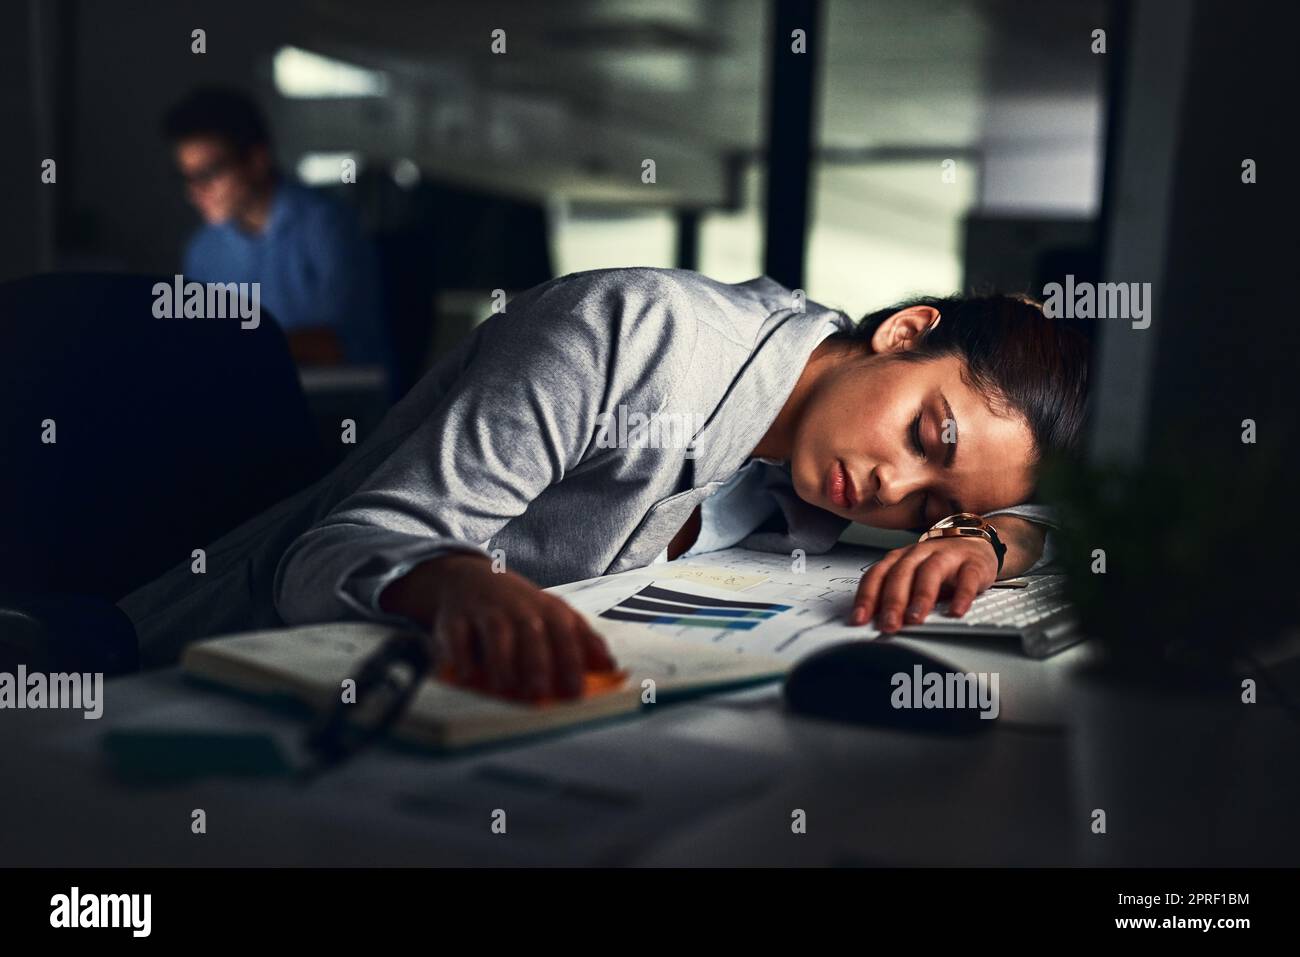 Shes reached her limit. a young attractive businesswoman sleeping in the office. Stock Photo